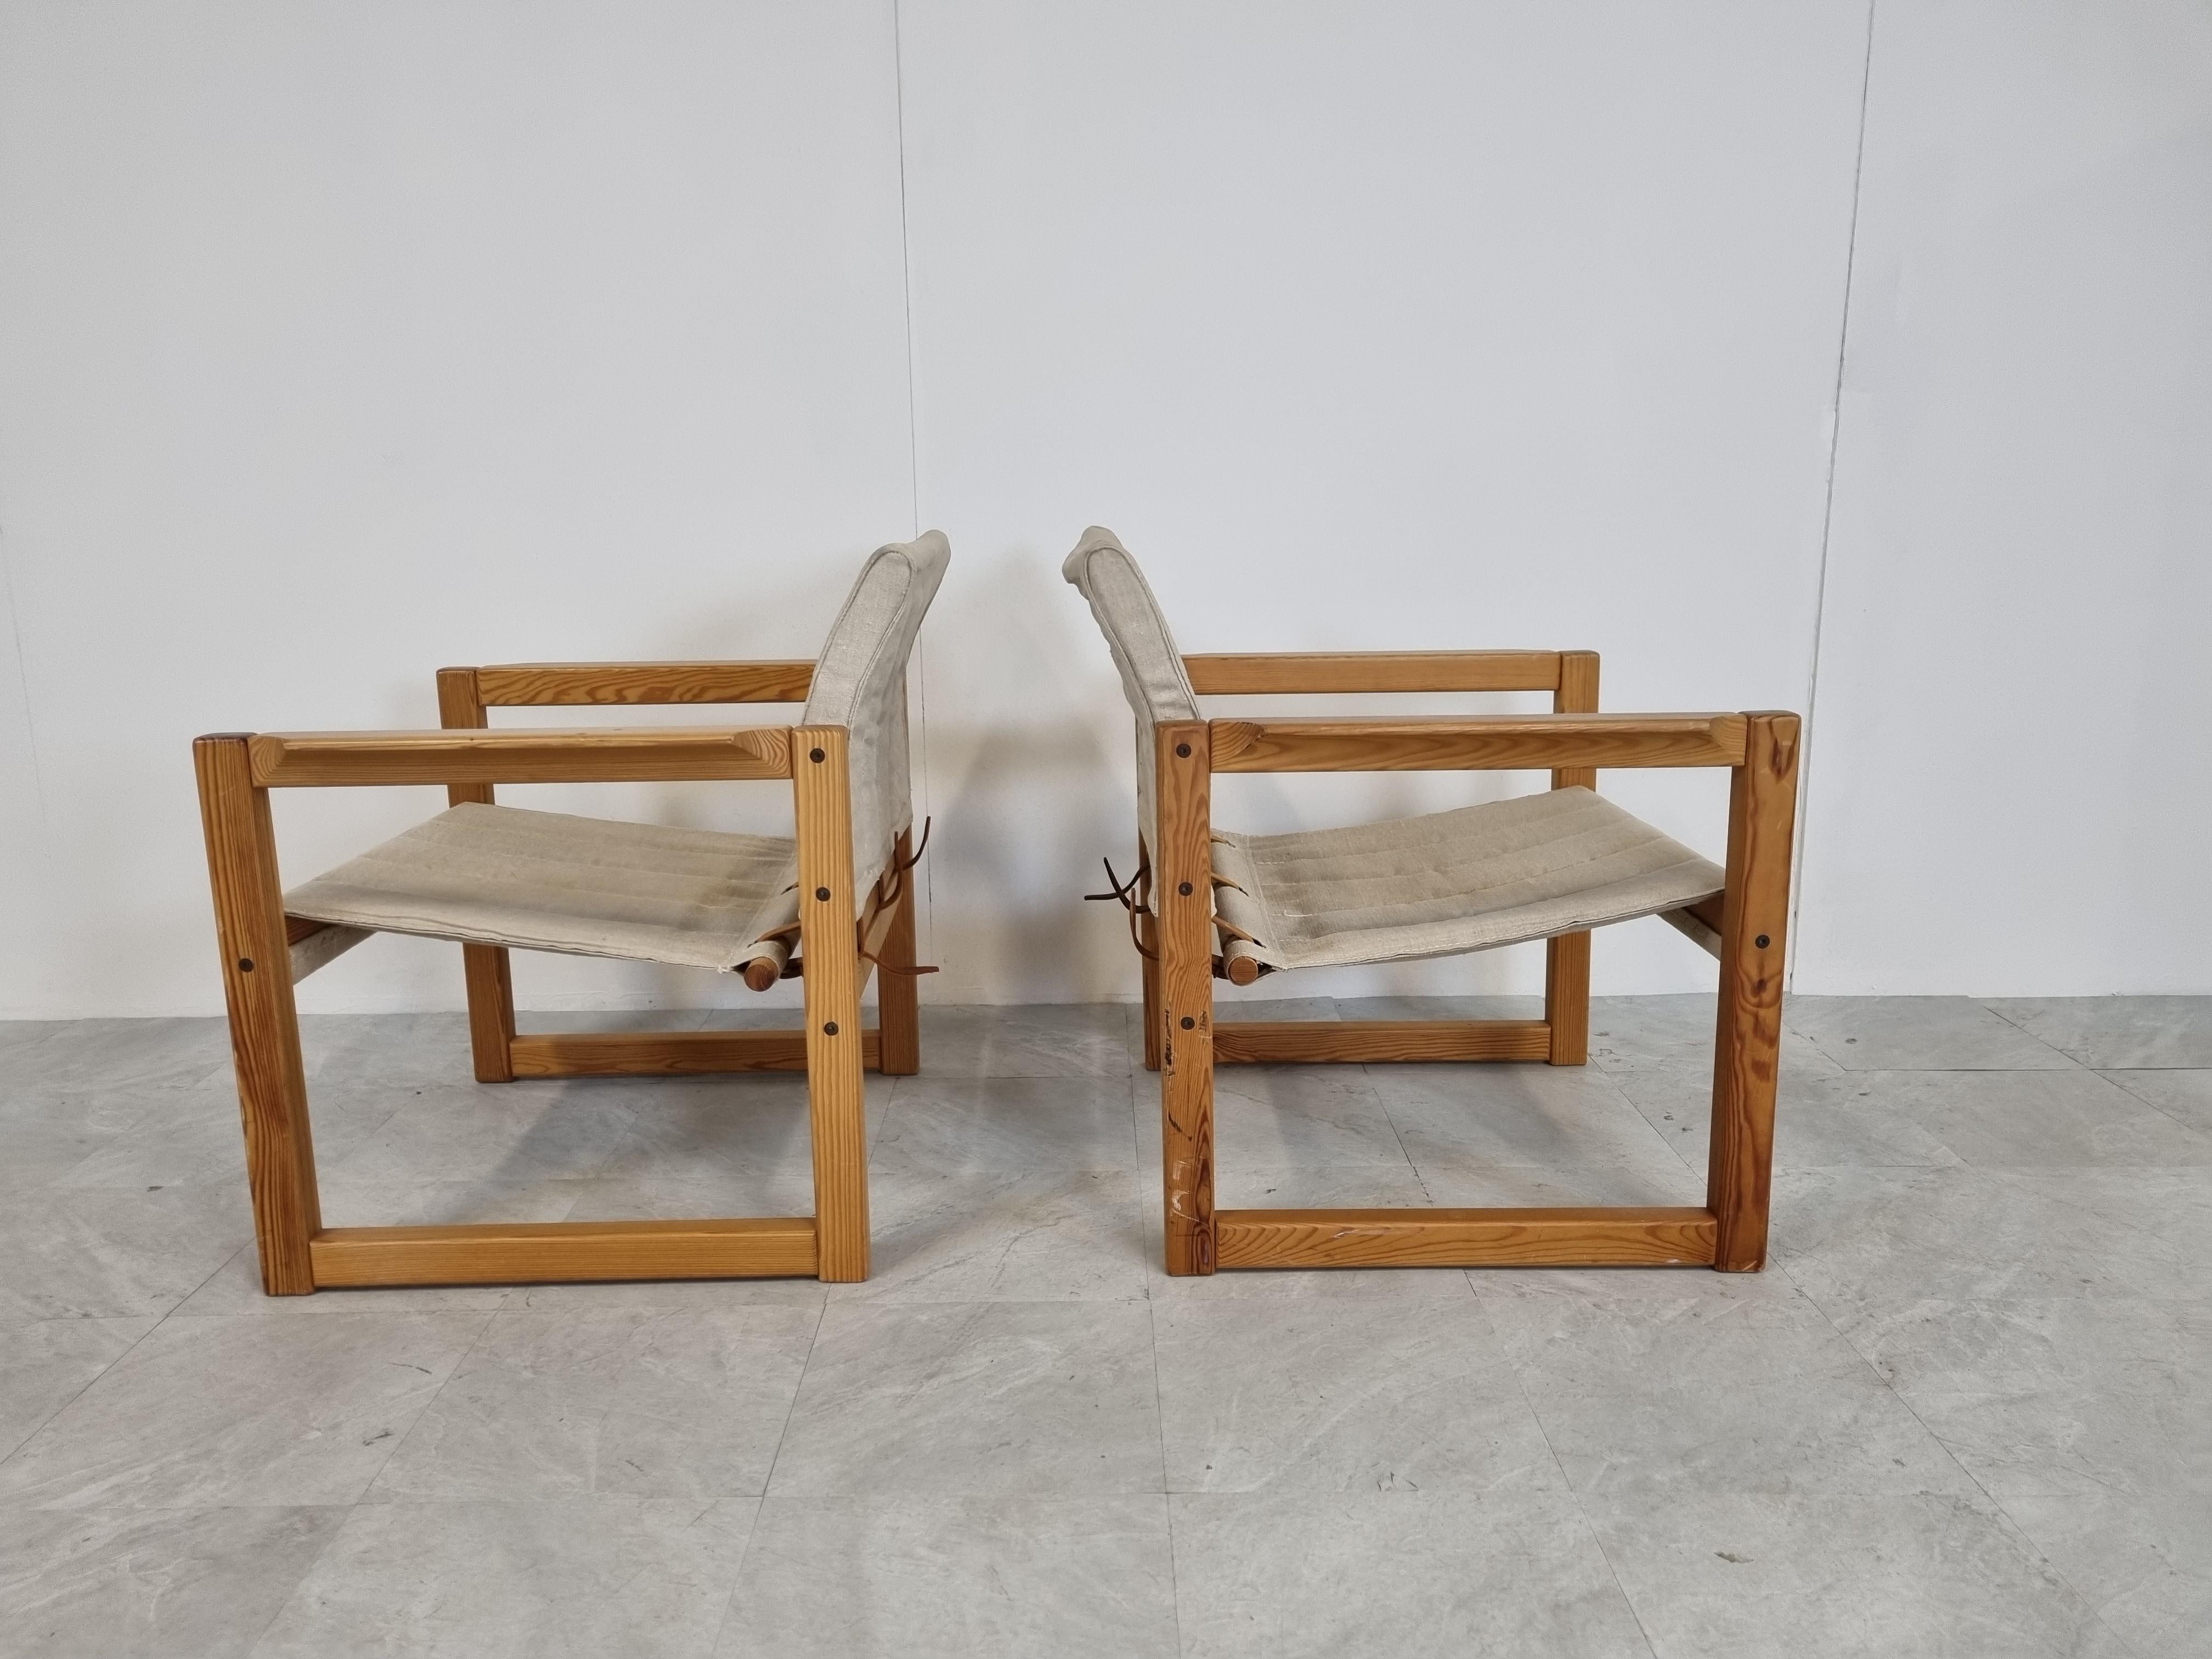 Swedish Pair of Diana Armchairs Designed by Karin Mobring for Ikea, 1970s